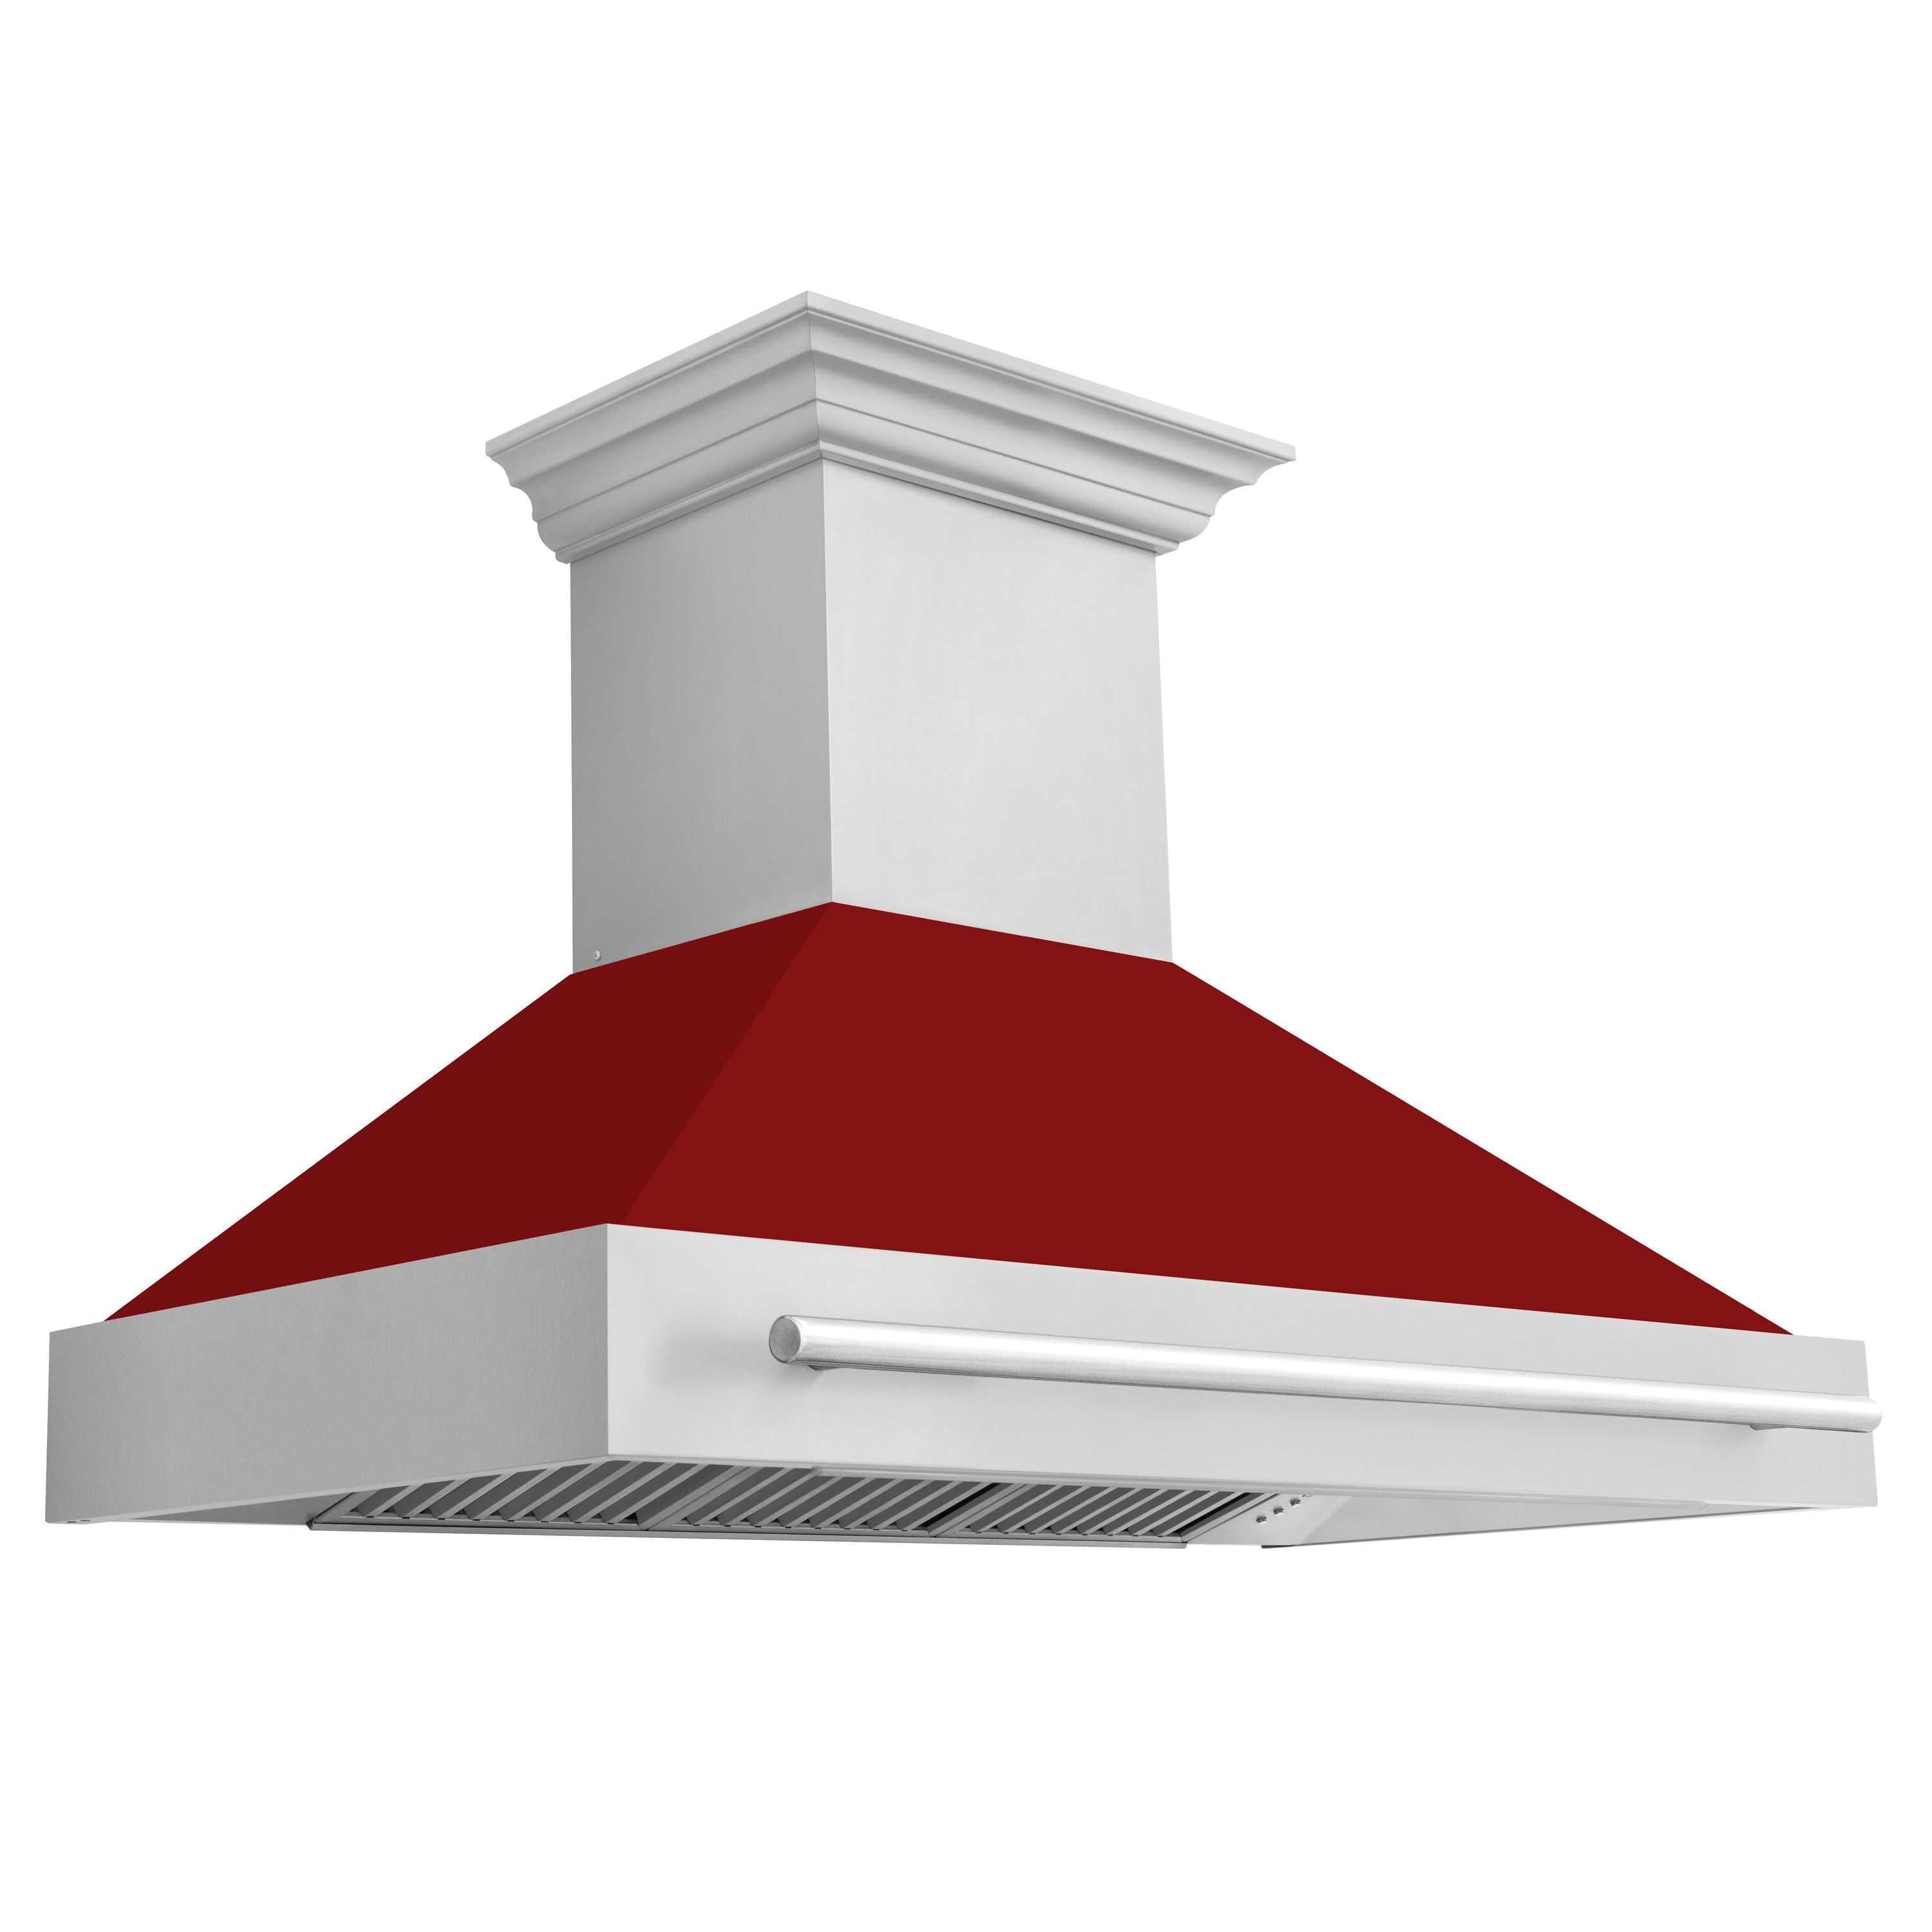 ZLINE 48 Inch Stainless Steel Range Hood with Red Gloss Shell, 8654STX-RG48